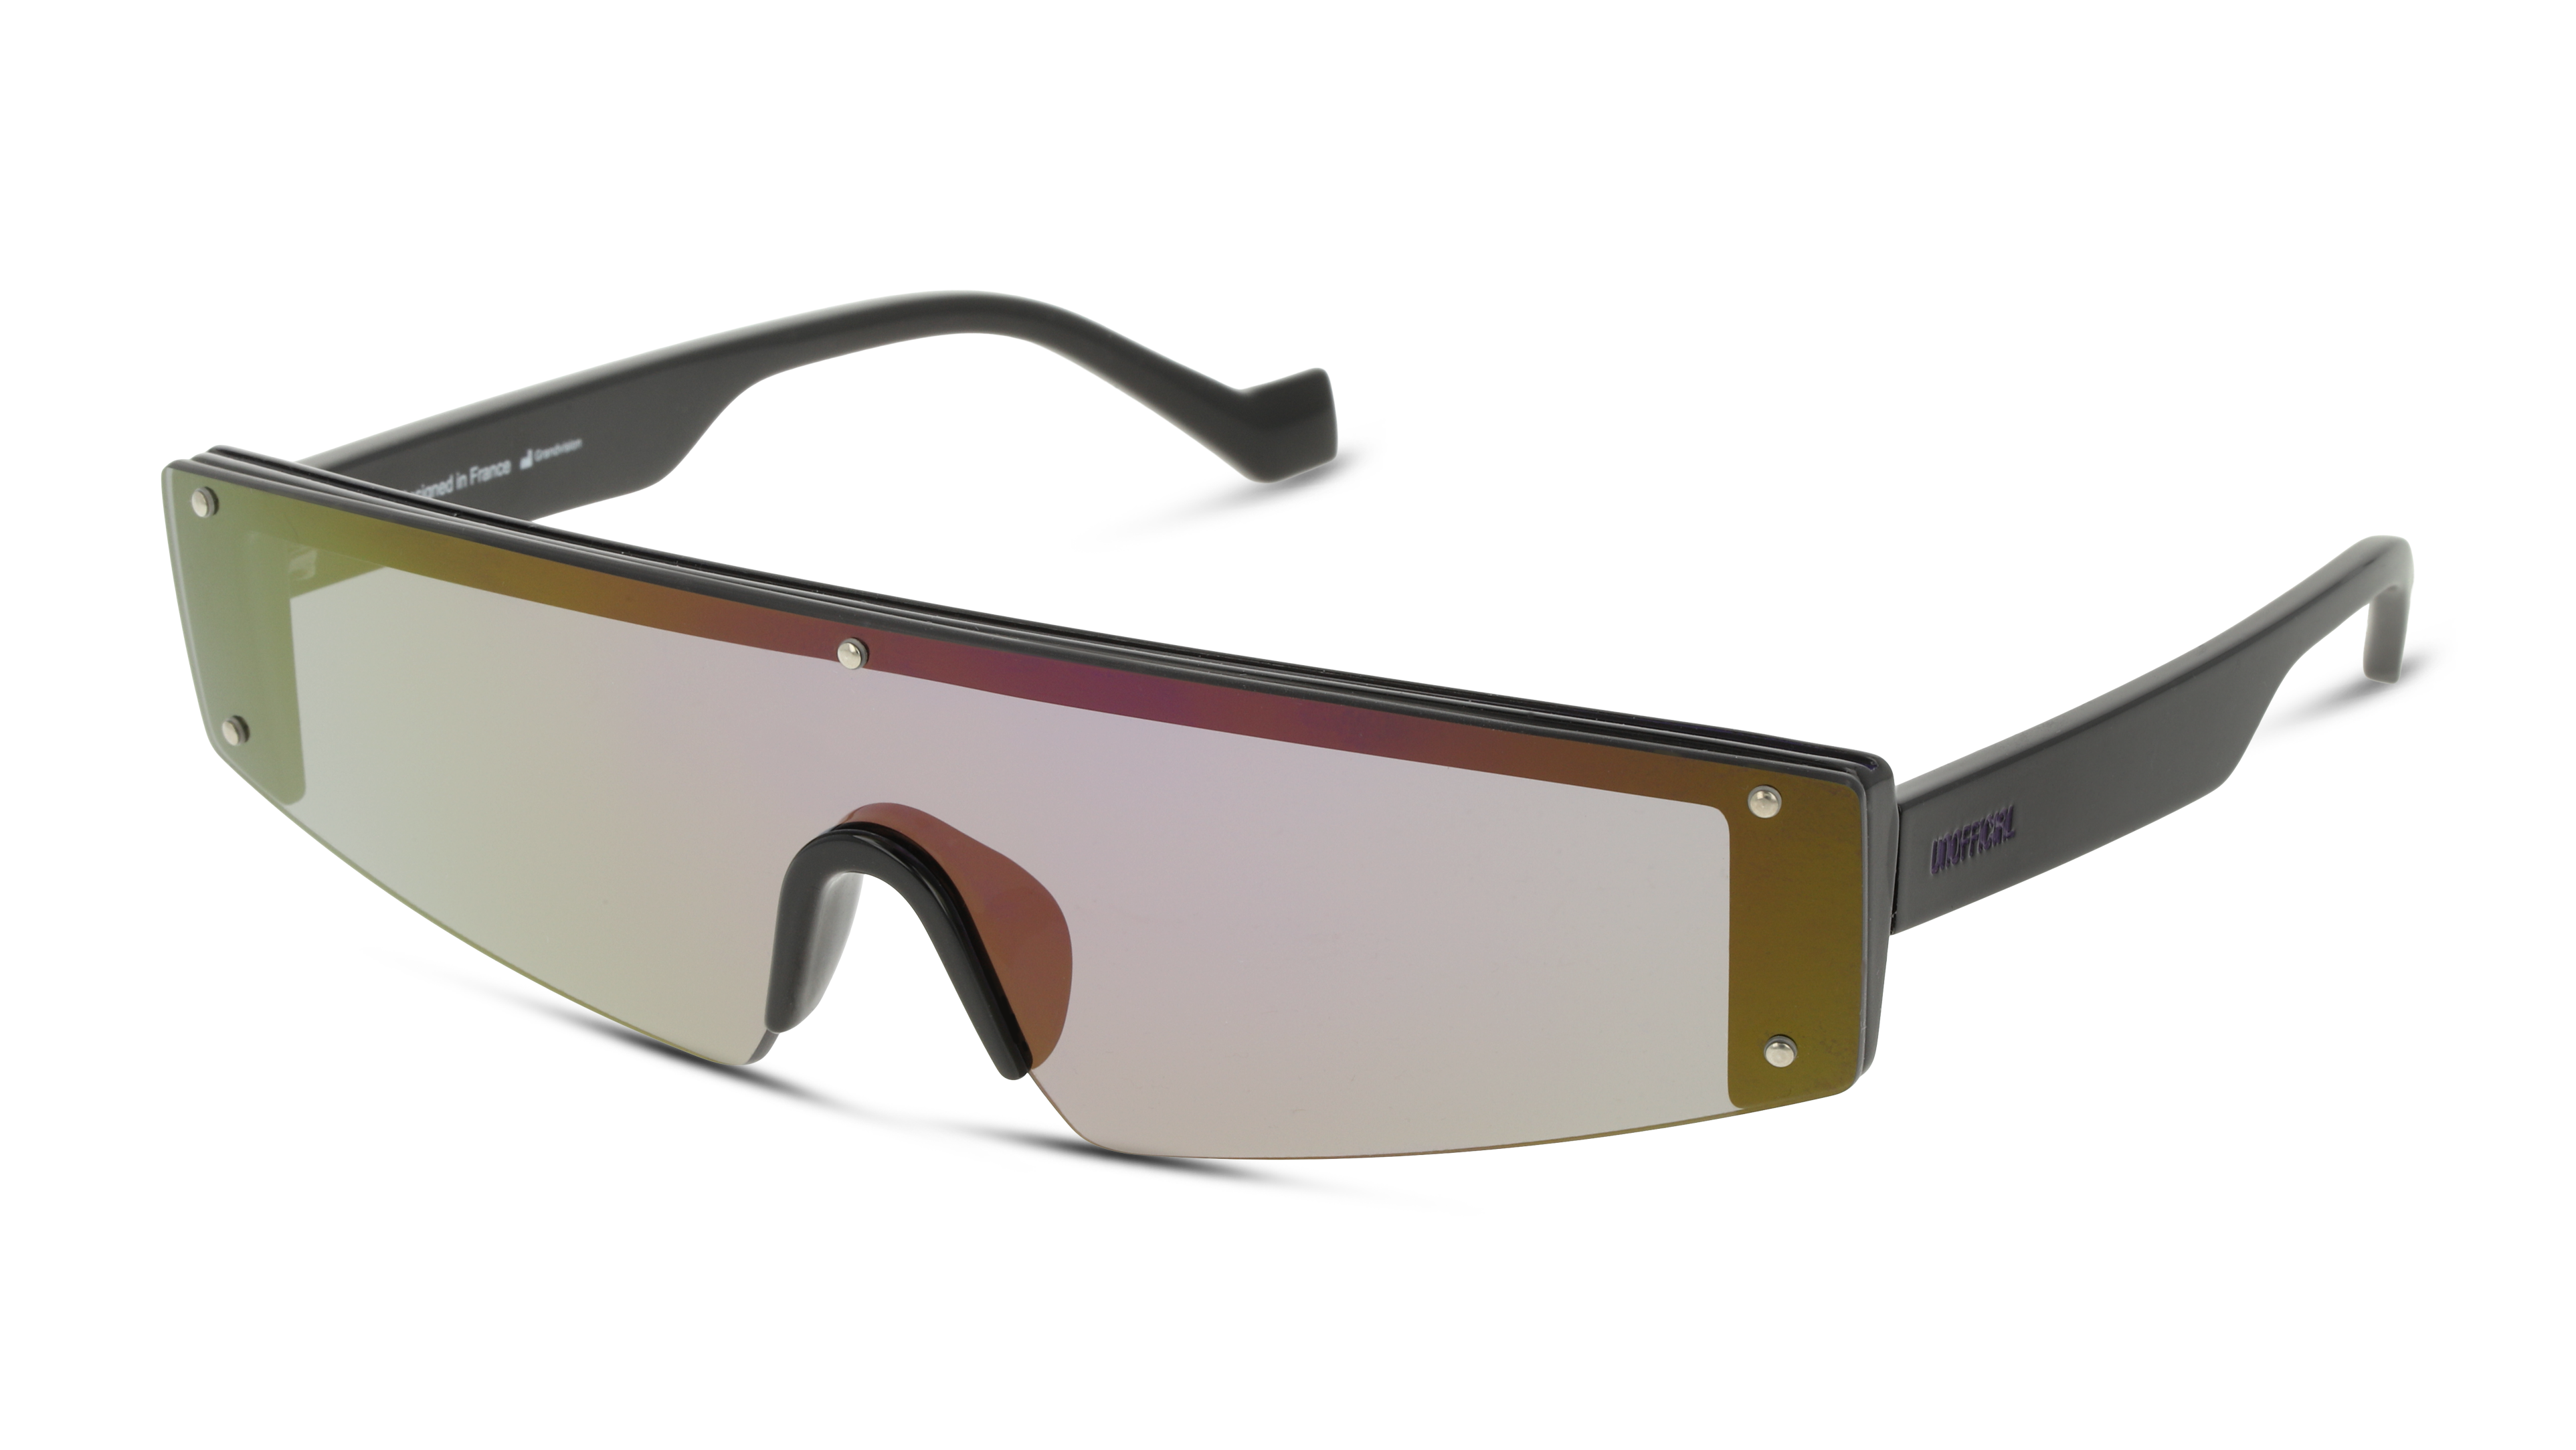 Angle_Left01 Fortnite with Unofficial UNSU0148 Sunglasses Grey / Black